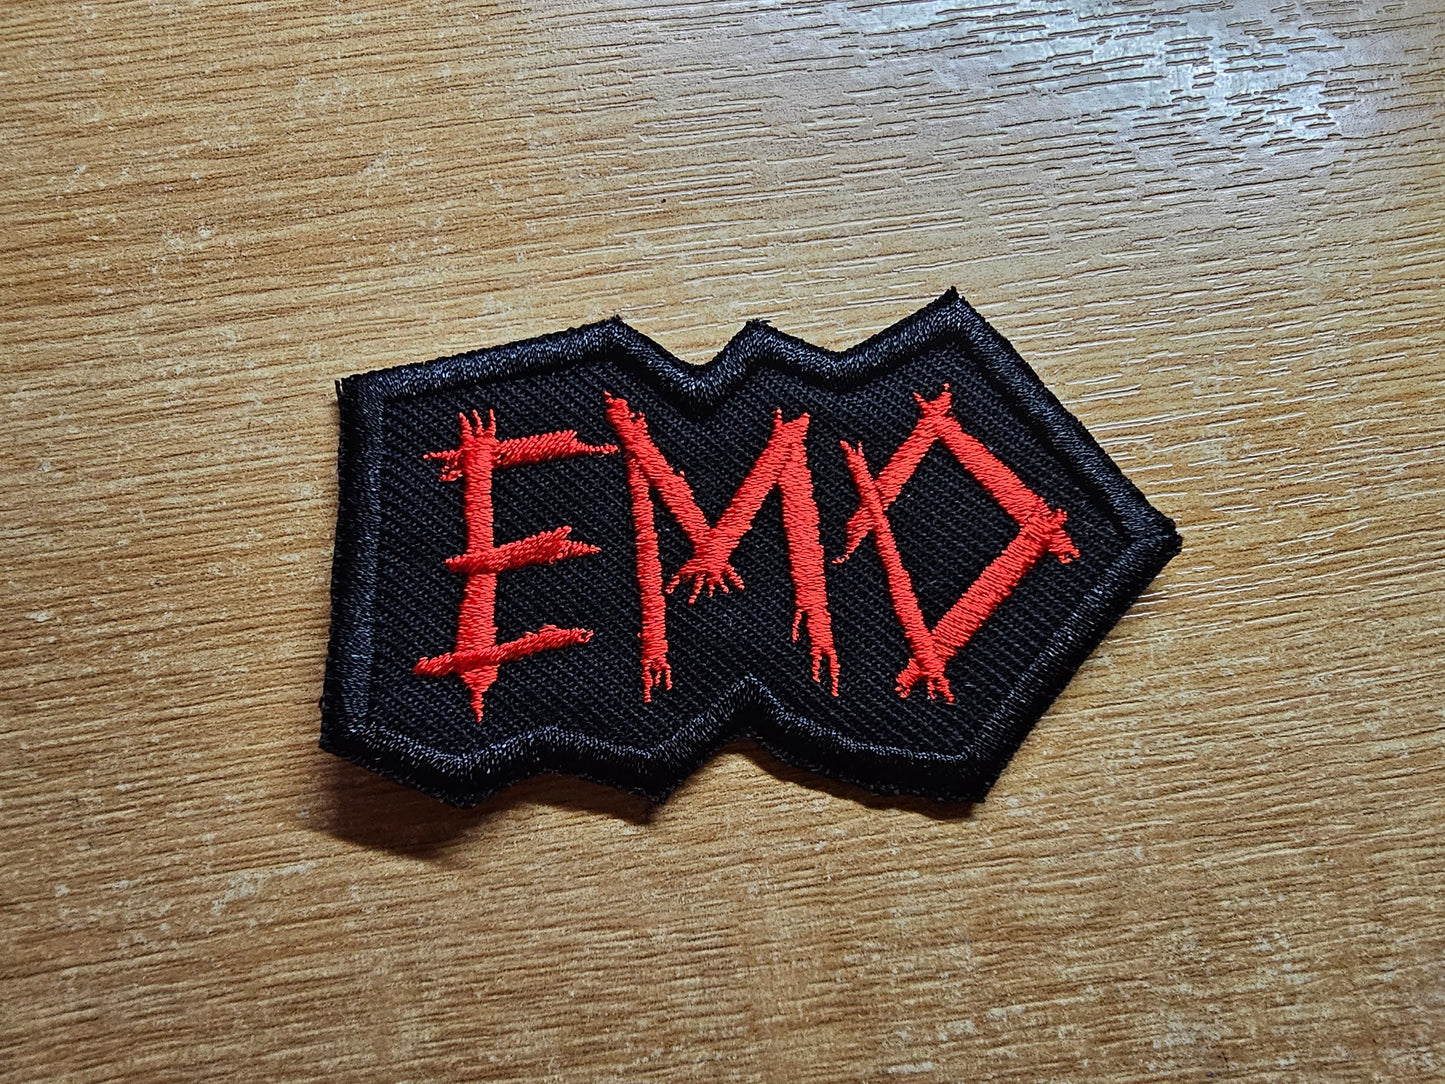 Emo Embroidered Patch Pop Punk Metalcore 00s Culture Throwback Red